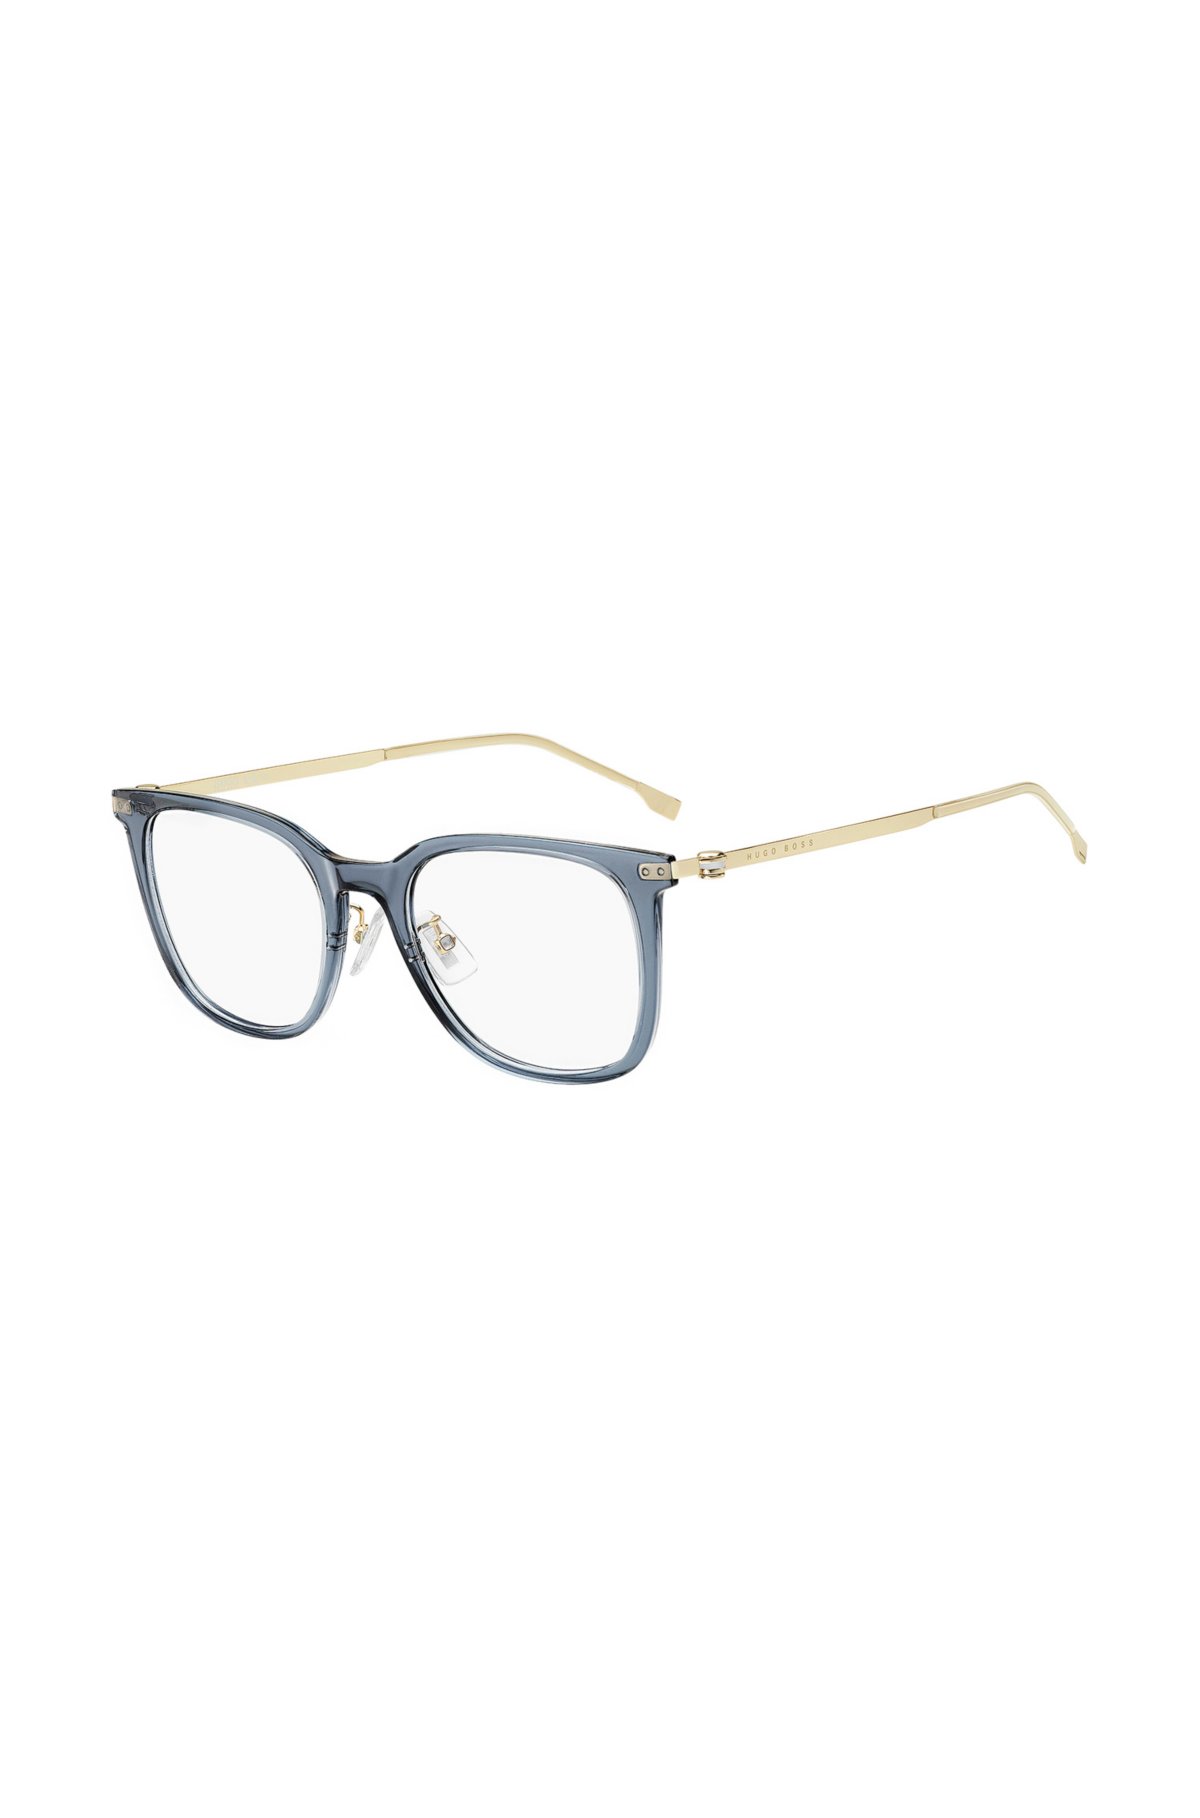 BOSS - Blue-acetate optical frames with gold-tone temples